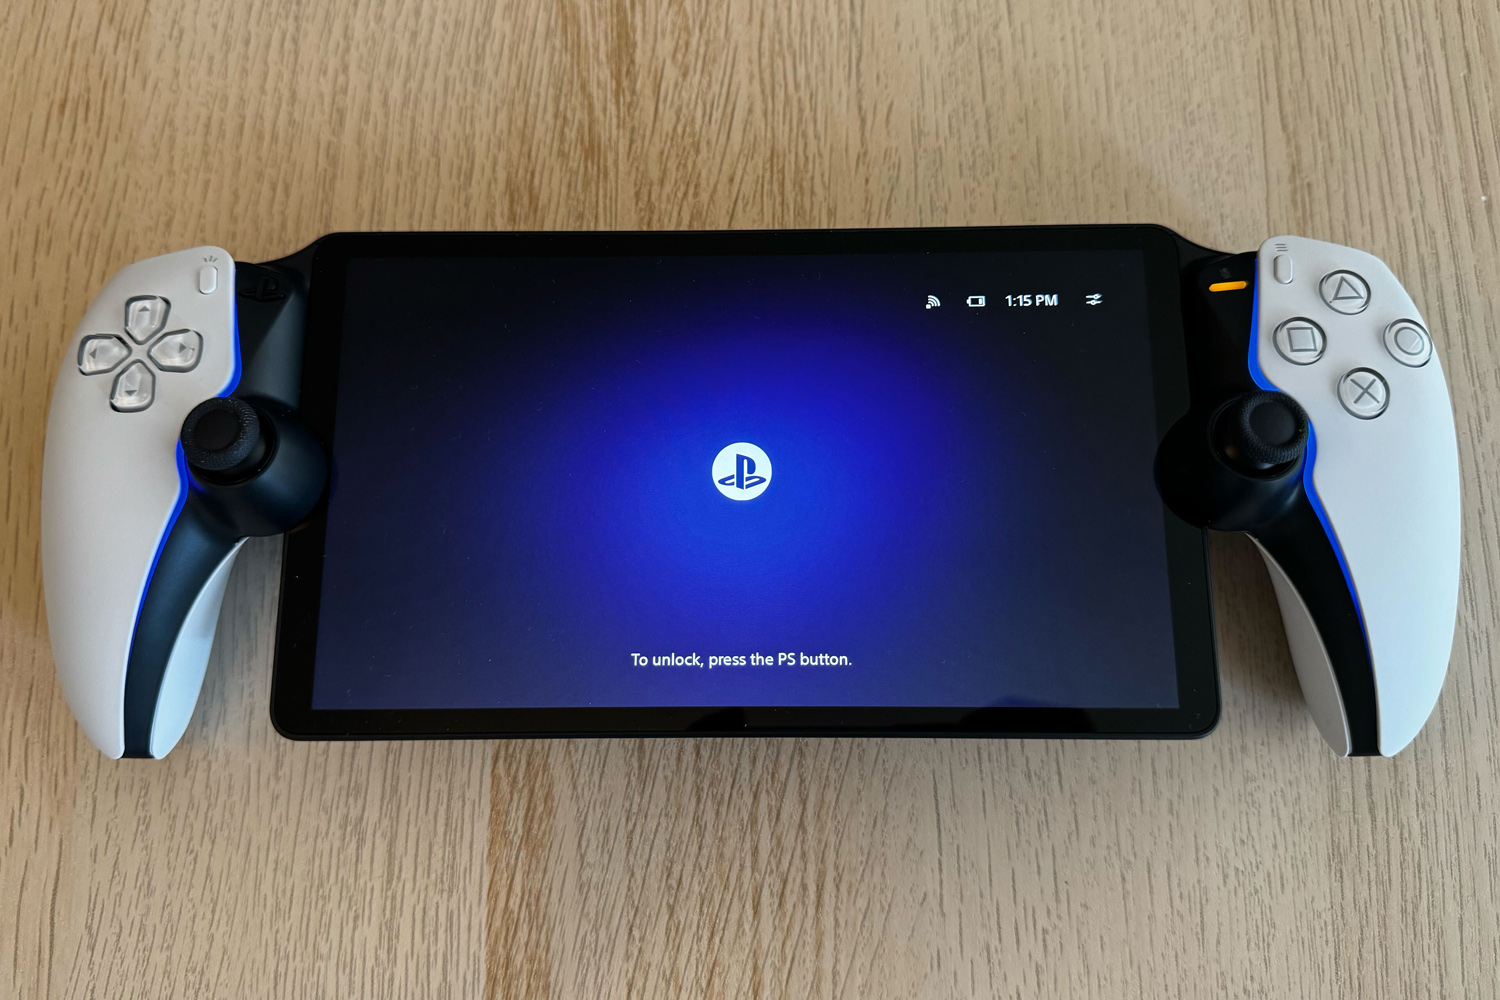 Sony PlayStation Portal Review! 